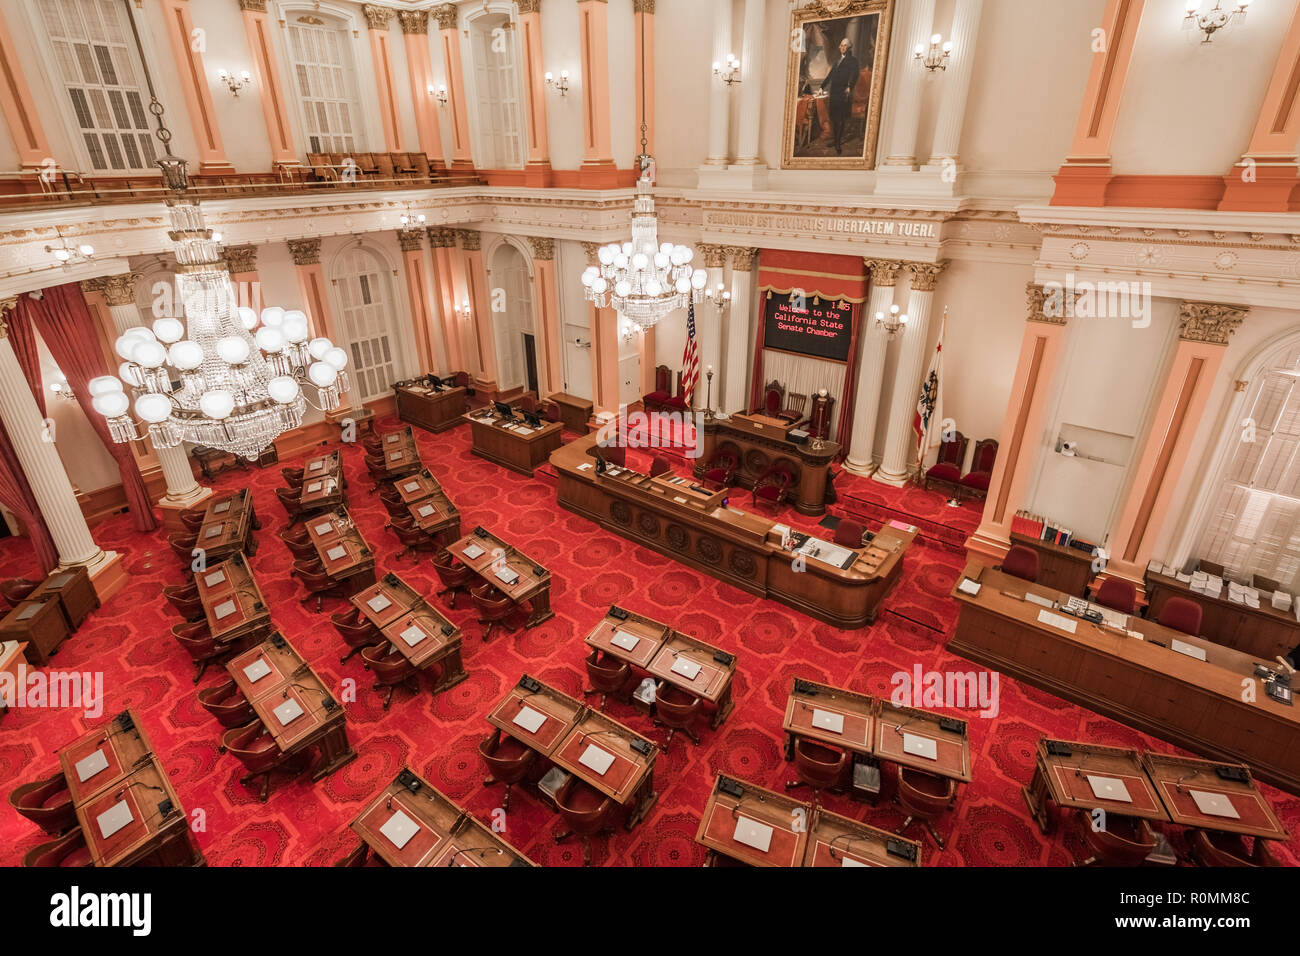 September 22, 2018 Sacramento / CA / USA - View of the Senate Assembly room located in the historical California State Capitol building Stock Photo